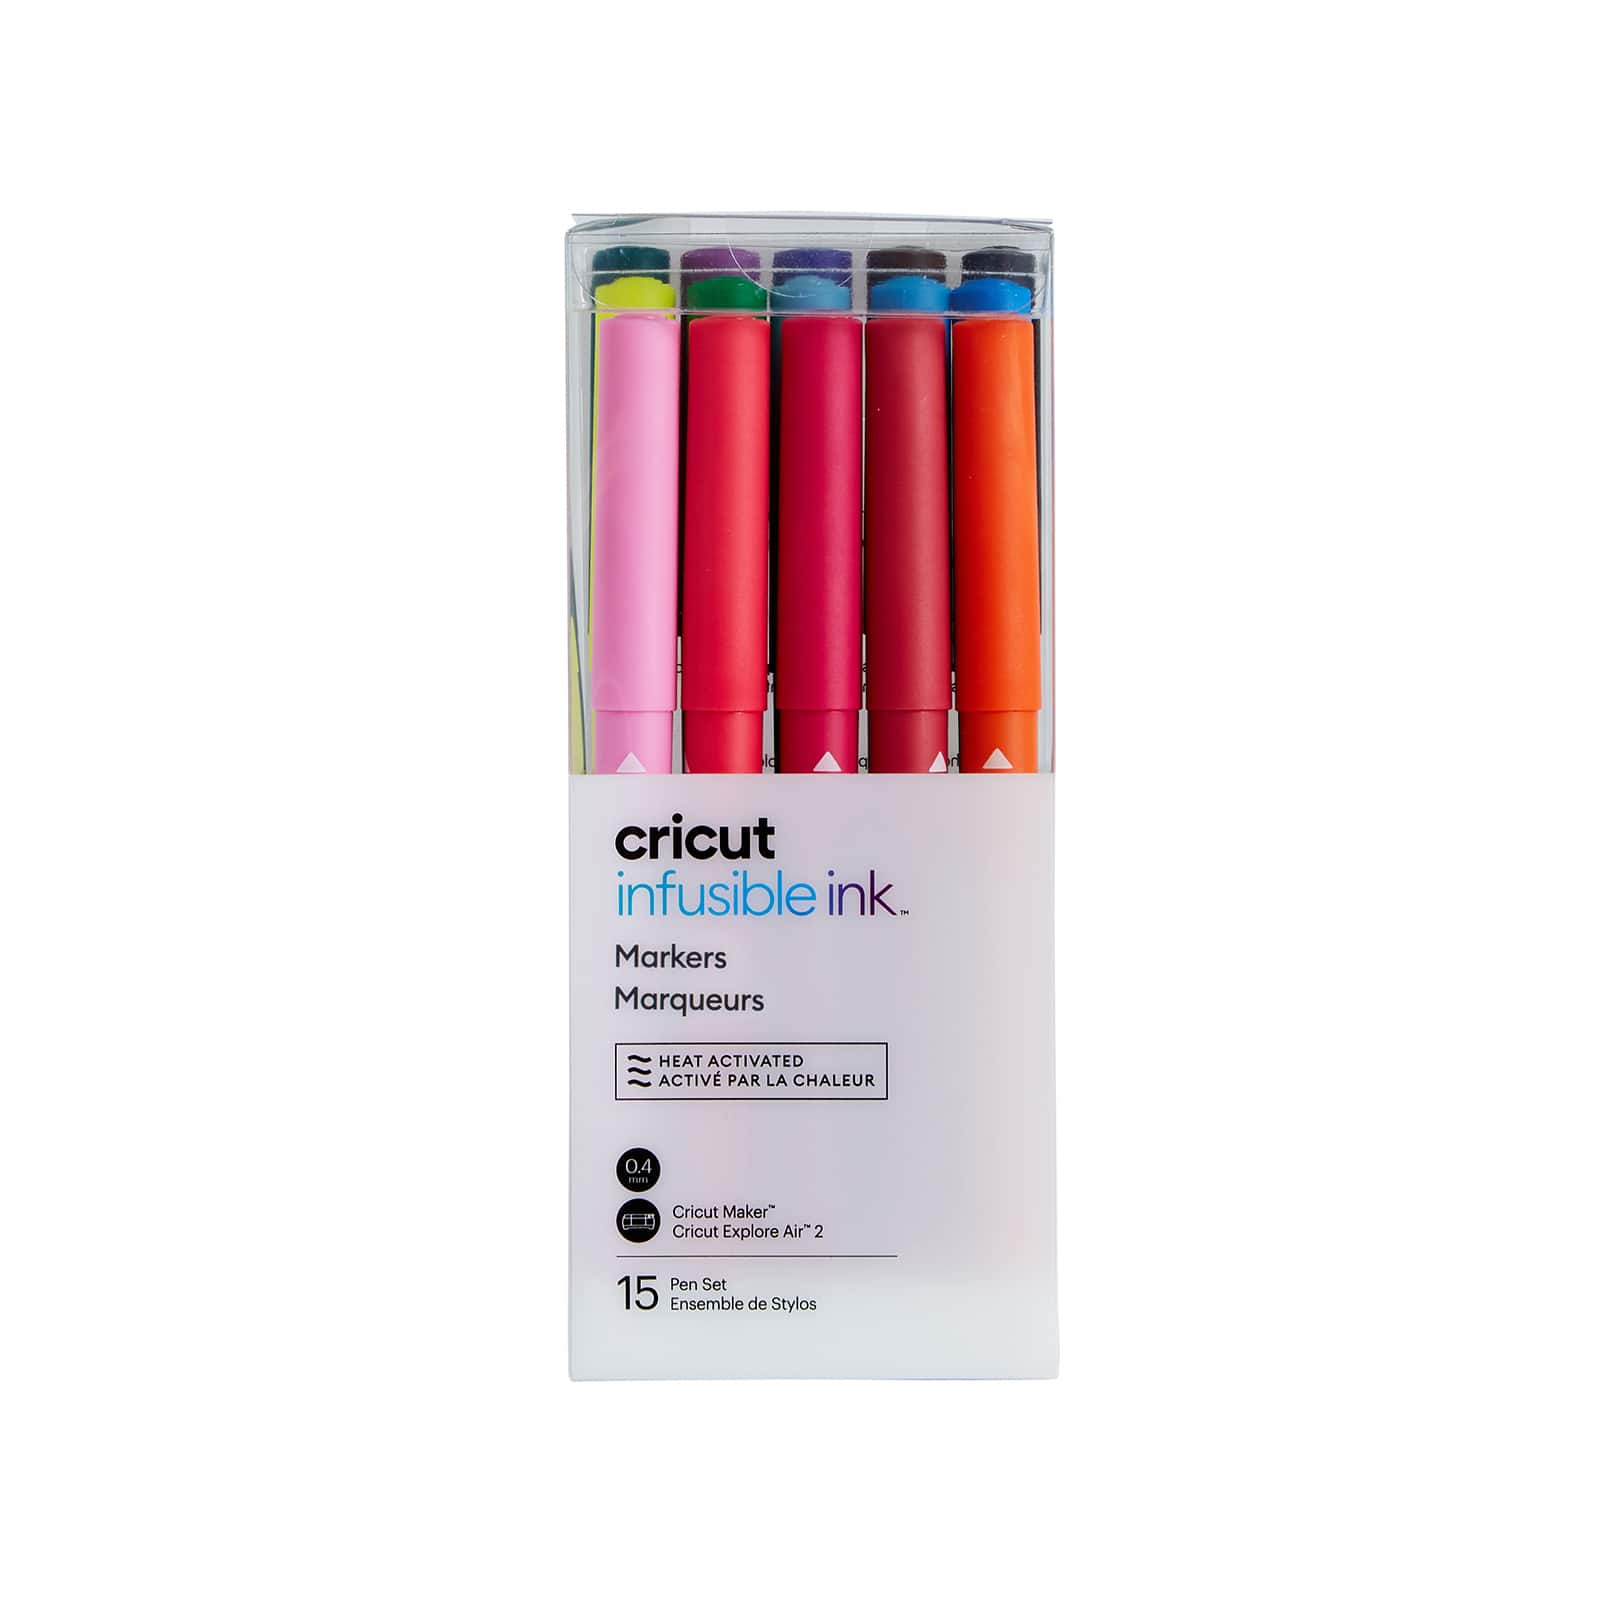 Cricut Infusible Ink Markers 15pc in Marker Inks for sale online